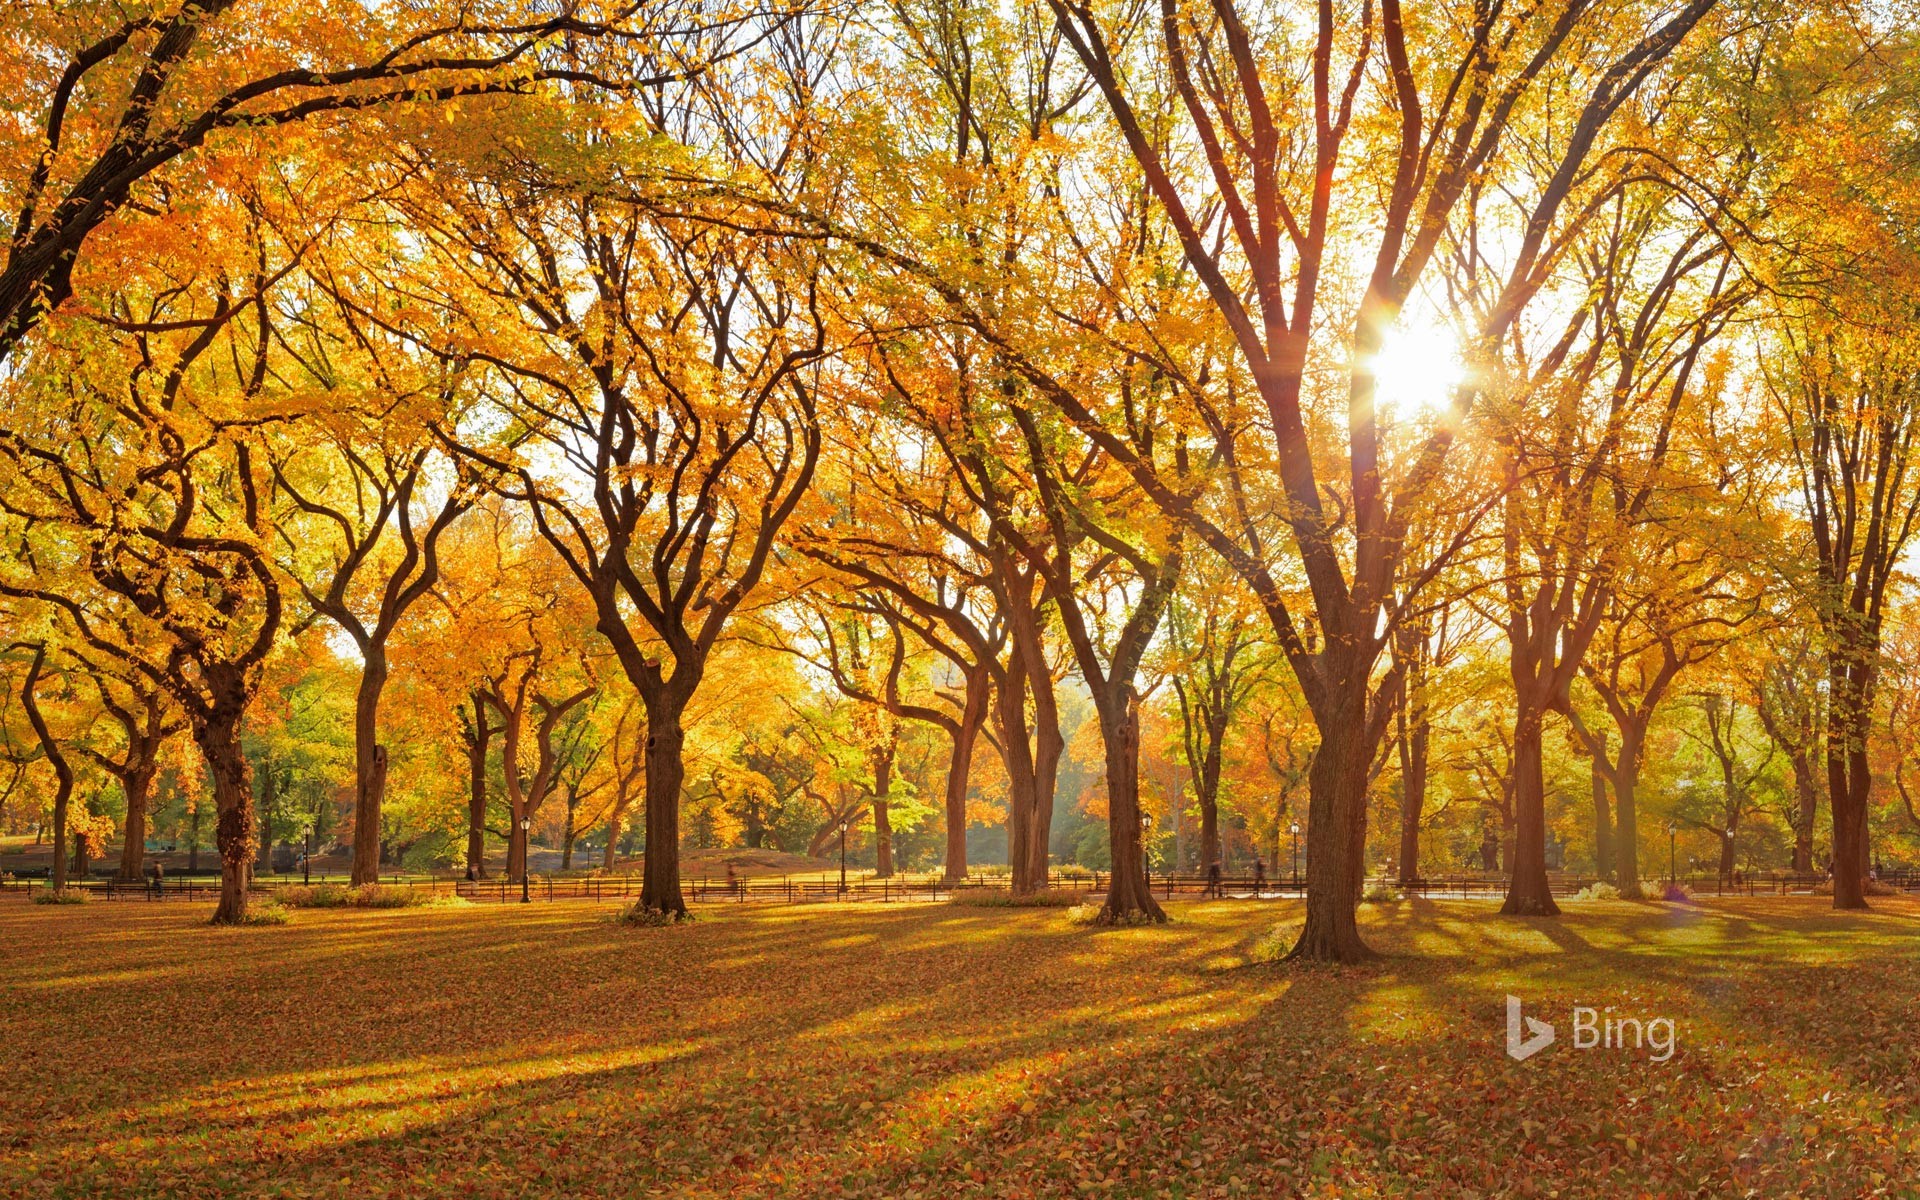 A grove of American elm trees at Central Park's Mall, New York City